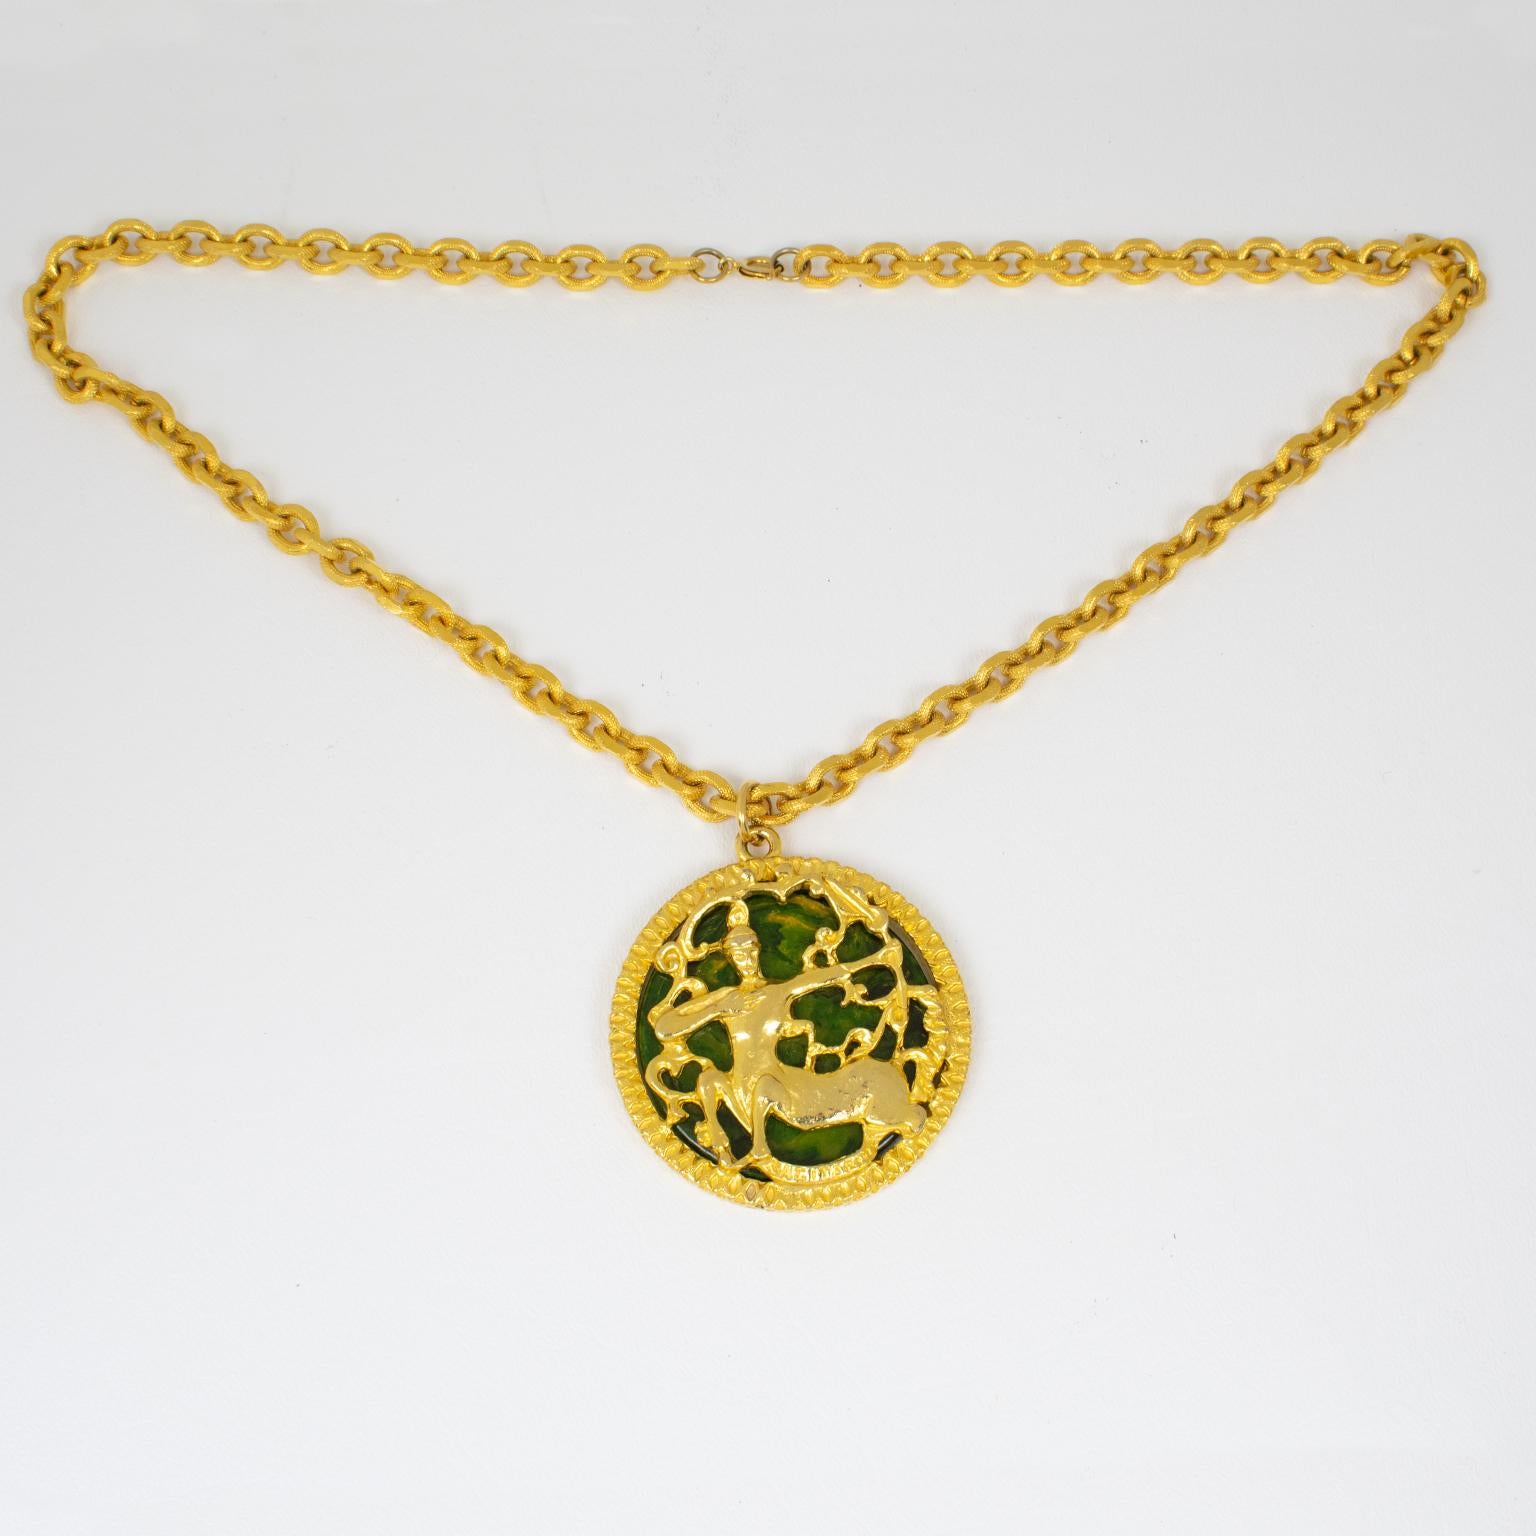 Pauline Rader Gilt Metal Necklace with Centaur Pendant and Green Bakelite, 1970s In Good Condition For Sale In Atlanta, GA